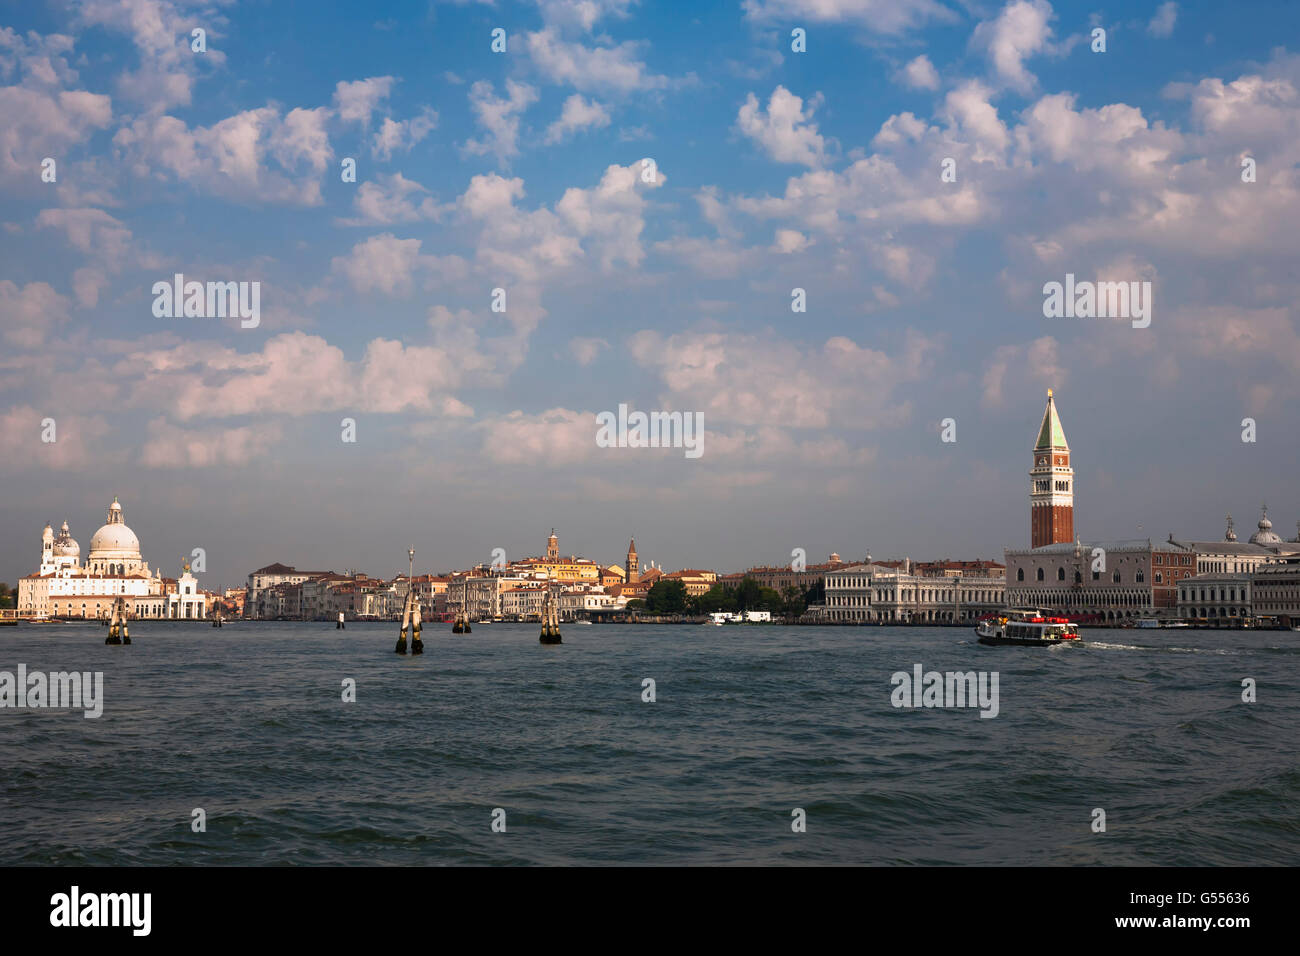 The classic first view of Venice when arriving by sea: the Bacino di San Marco, Venice, Italy Stock Photo